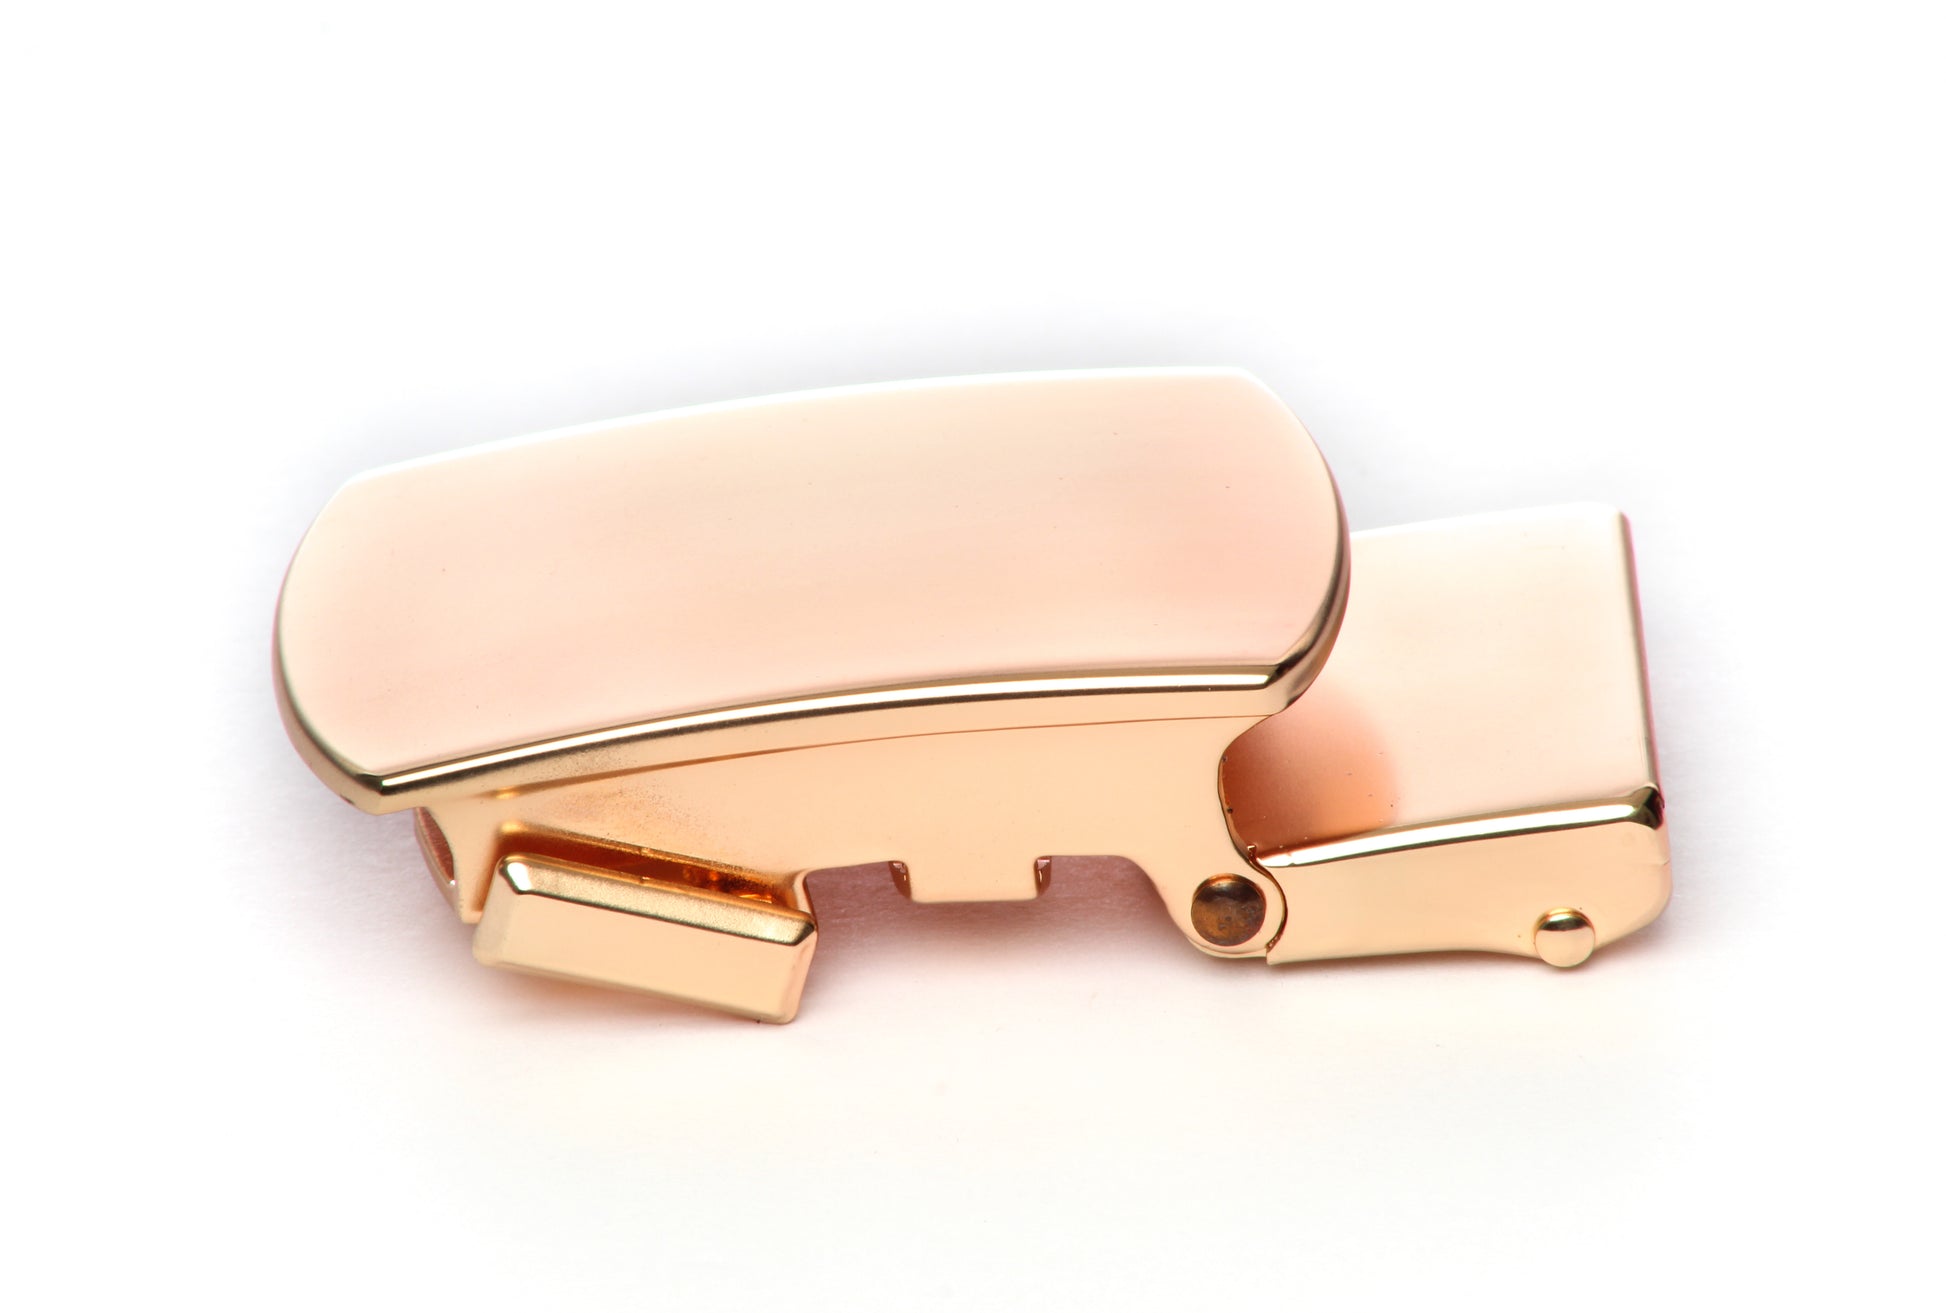 Men's classic with a curve ratchet belt buckle in rose gold with a 1.25-inch width, left side view.